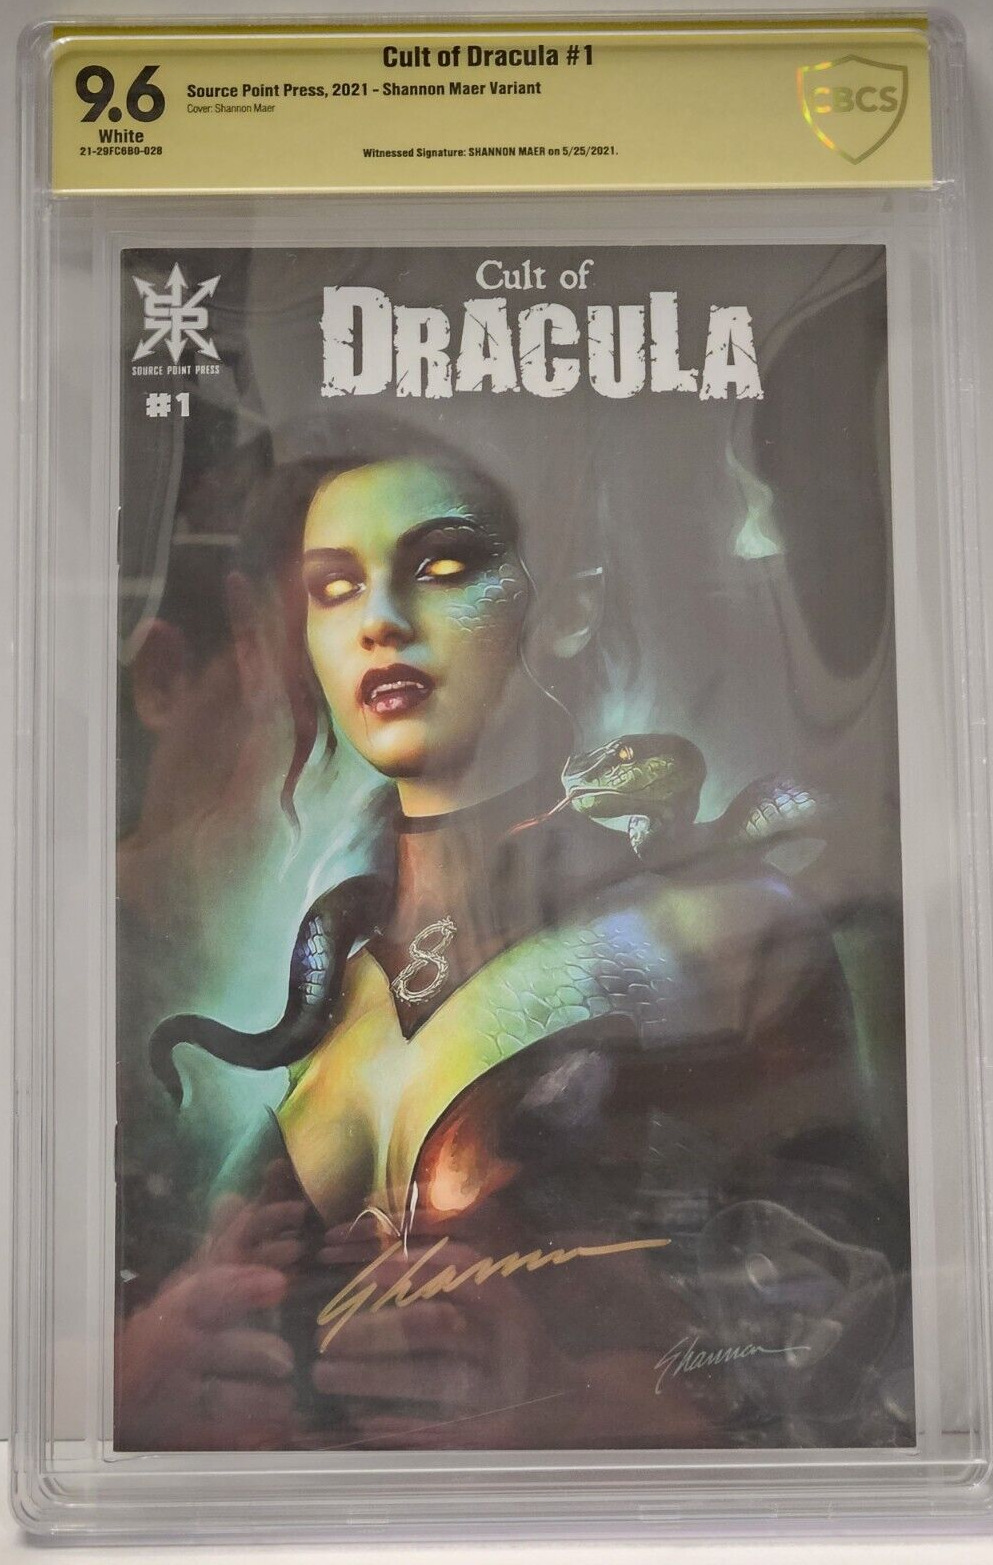 CBCS 9.6 Cult of Dracula #1 Shannon Maer Variant Signed 2021 Source Point Press